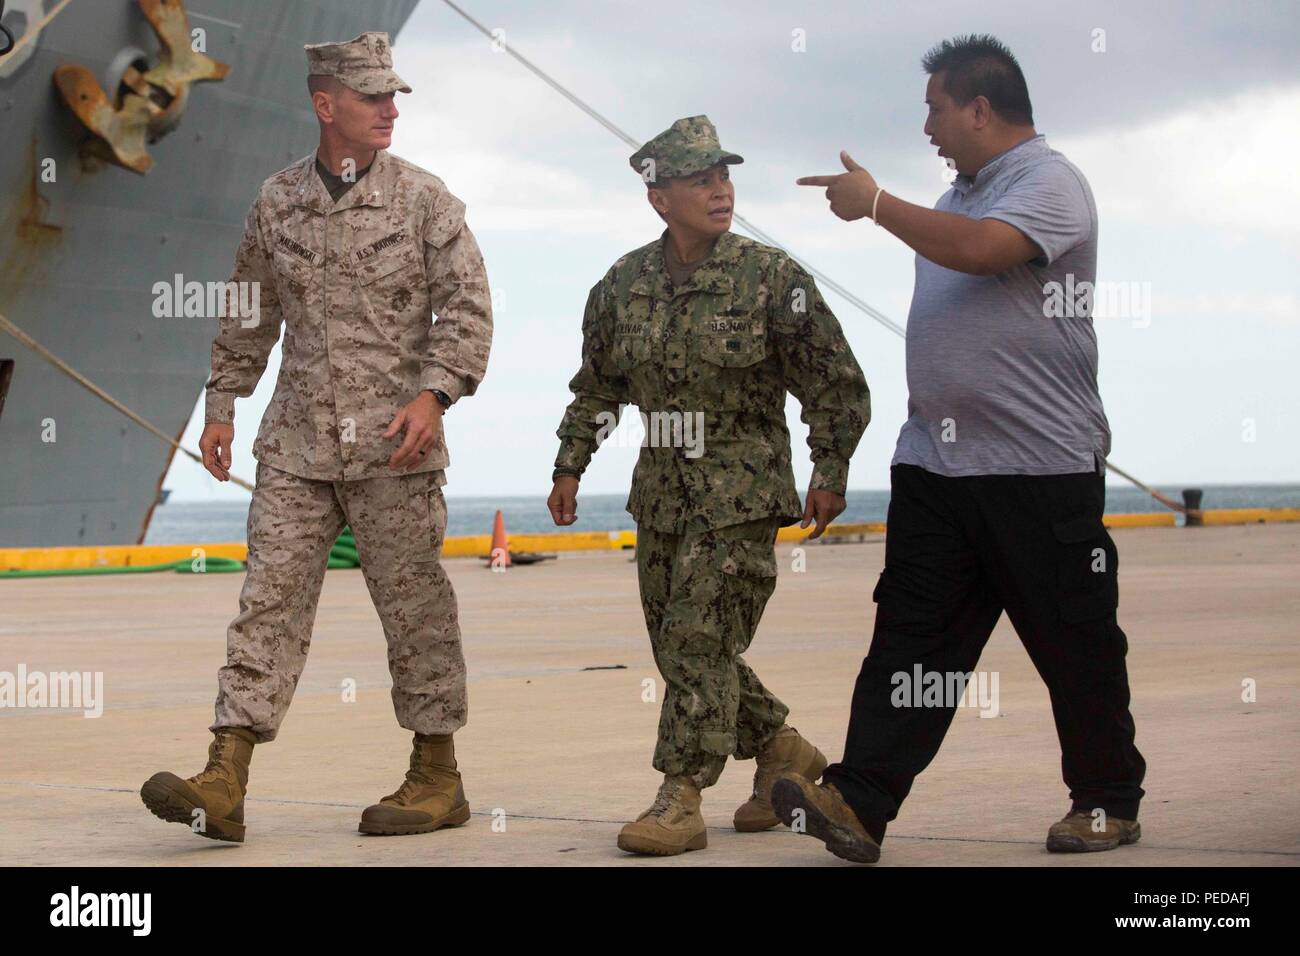 U.S. Marine Lt. Col. Eric Malinowski, the commanding officer of Combat Logistics Battalion 31, 31st Marine Expeditionary Unit, speaks with U.S. Navy Rear Adm. Bette Bolivar, the commander of U.S. Naval Forces Marianas, and Ralph Torres, the acting governor of Saipan, about typhoon relief efforts in Saipan, Aug. 9, 2015. The Marines and sailors of the 31st MEU and the ships of the Bonhomme Richard Amphibious Ready Group are assisting the Federal Emergency Management Agency with distributing emergency relief supplies to Saipan. Saipan, the most populated island in the Commonwealth of the Norther Stock Photo